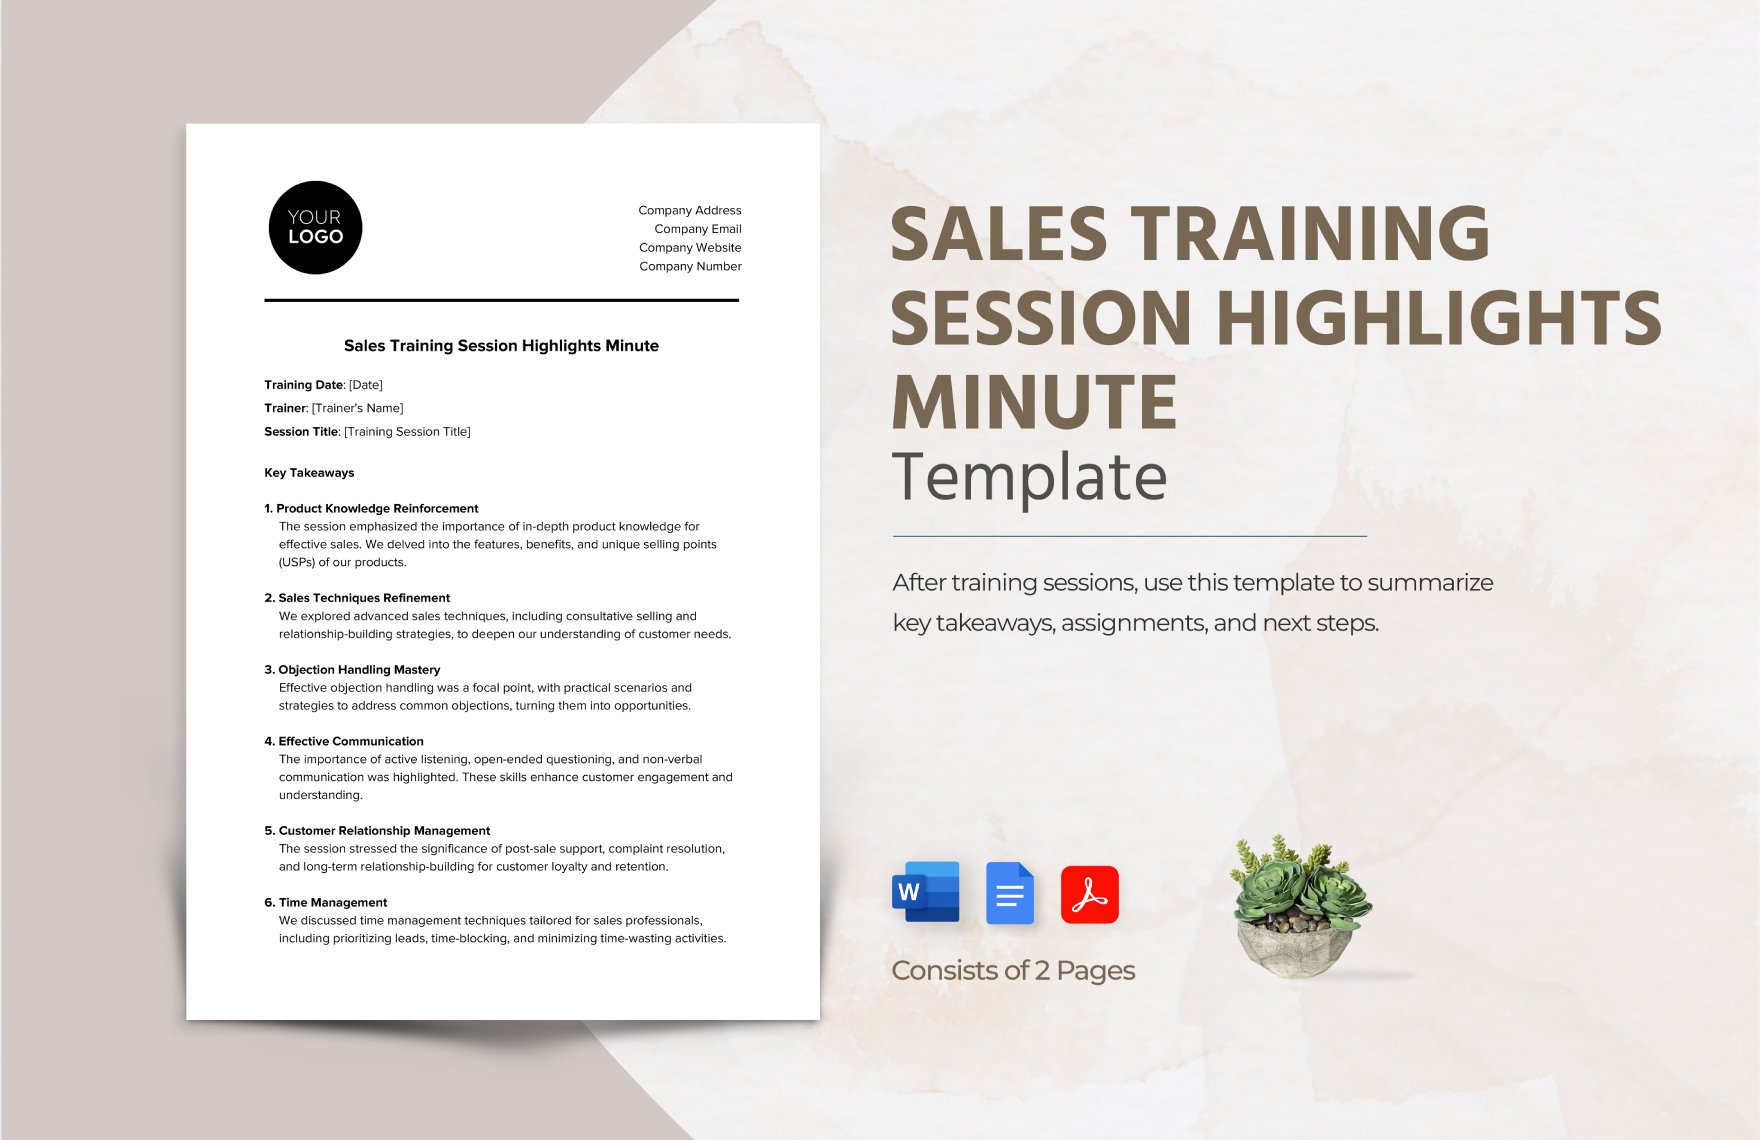 Sales Training Session Highlights Minute Template